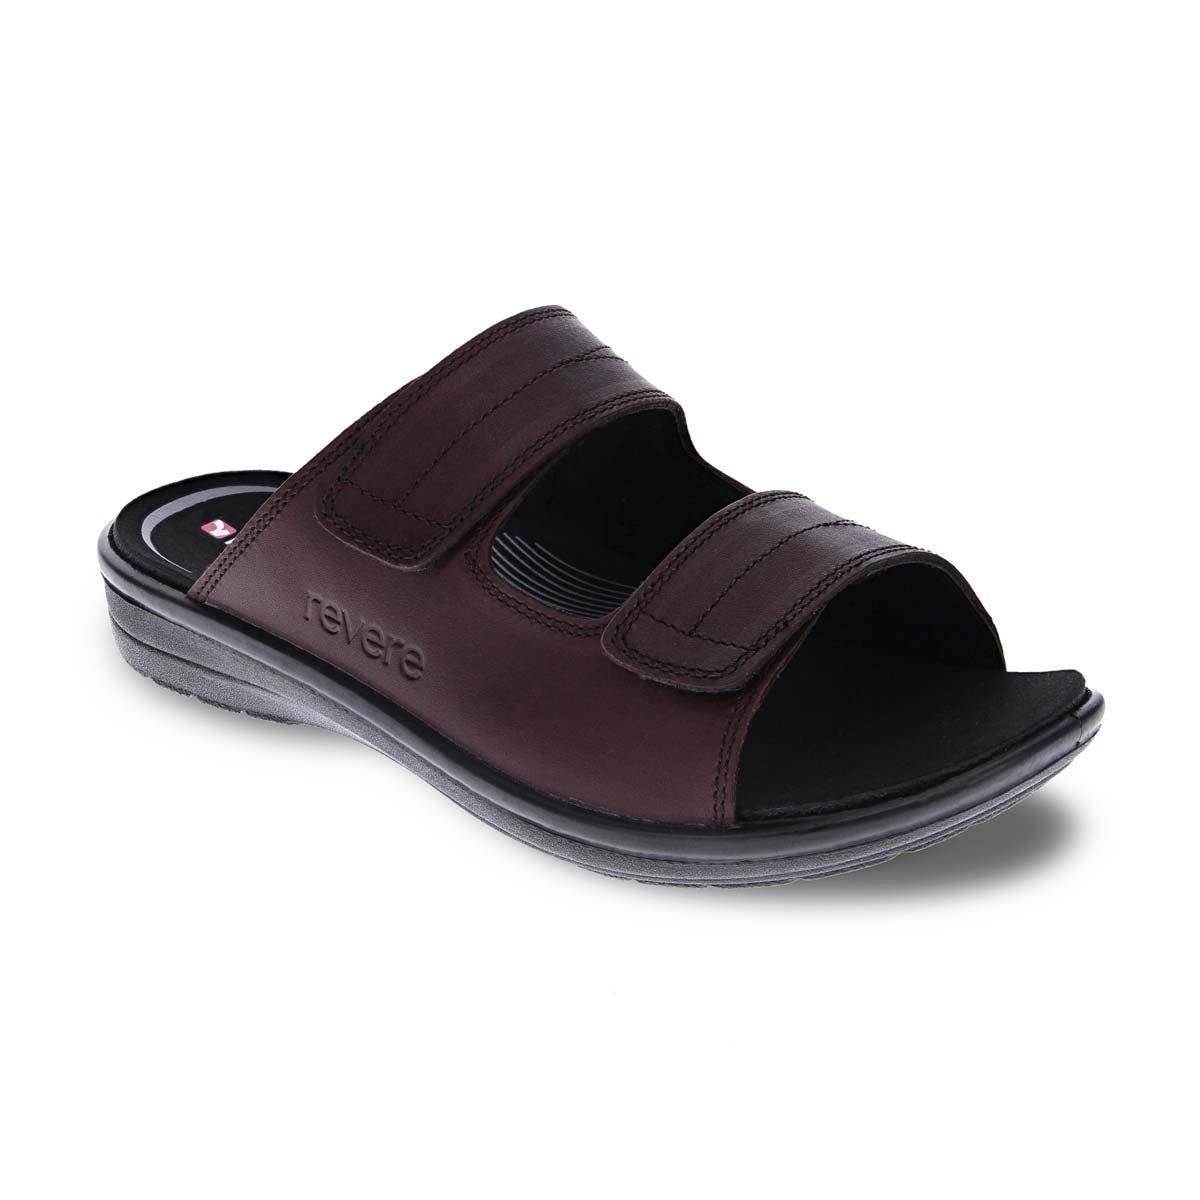 REVERE DURBAN MEN SANDALS IN WHISKEY - TLW Shoes